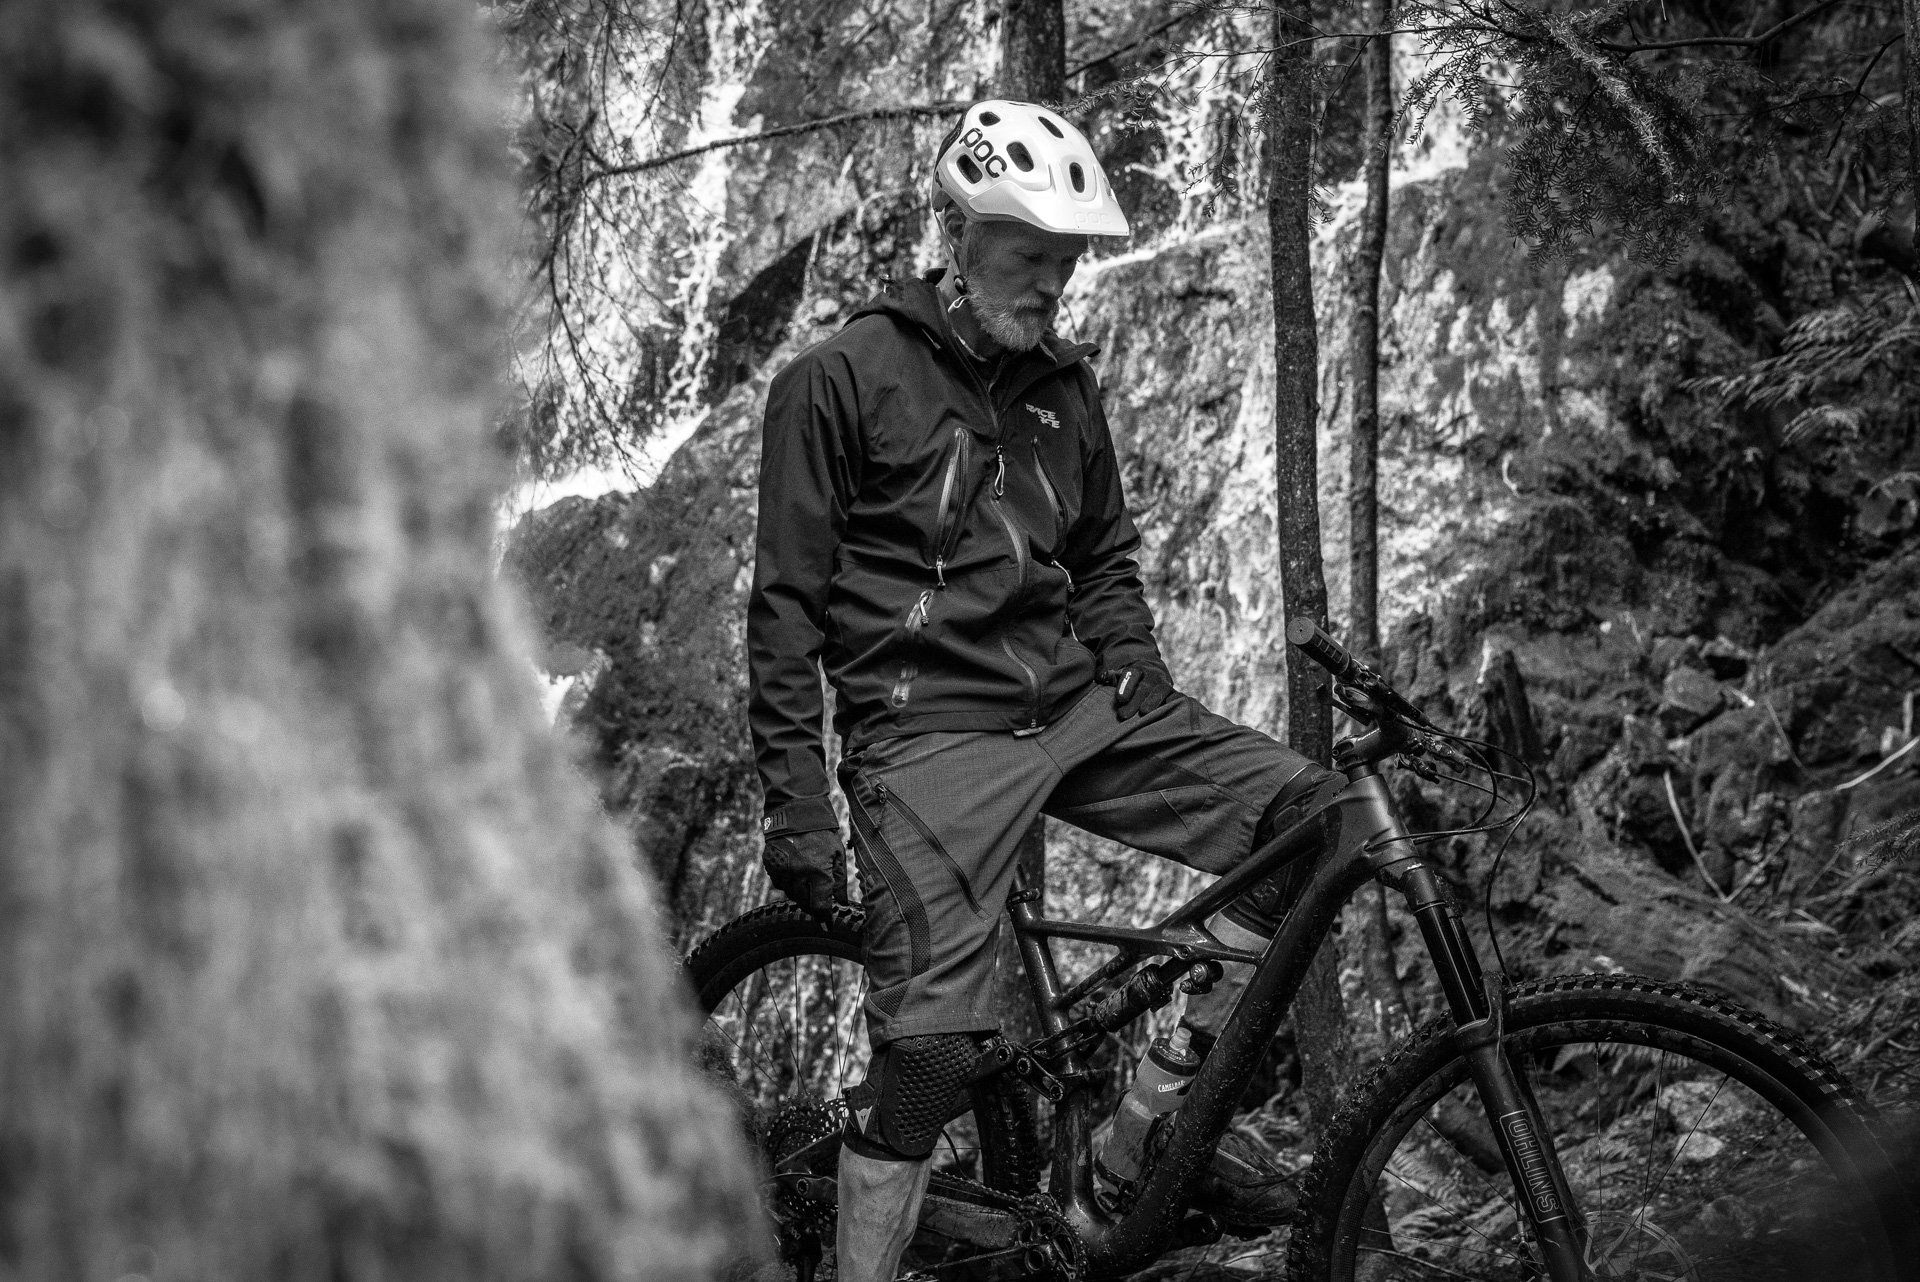 nsmb_2017_geareview_specialized_enduro29_PerrySchebel-7752.jpg